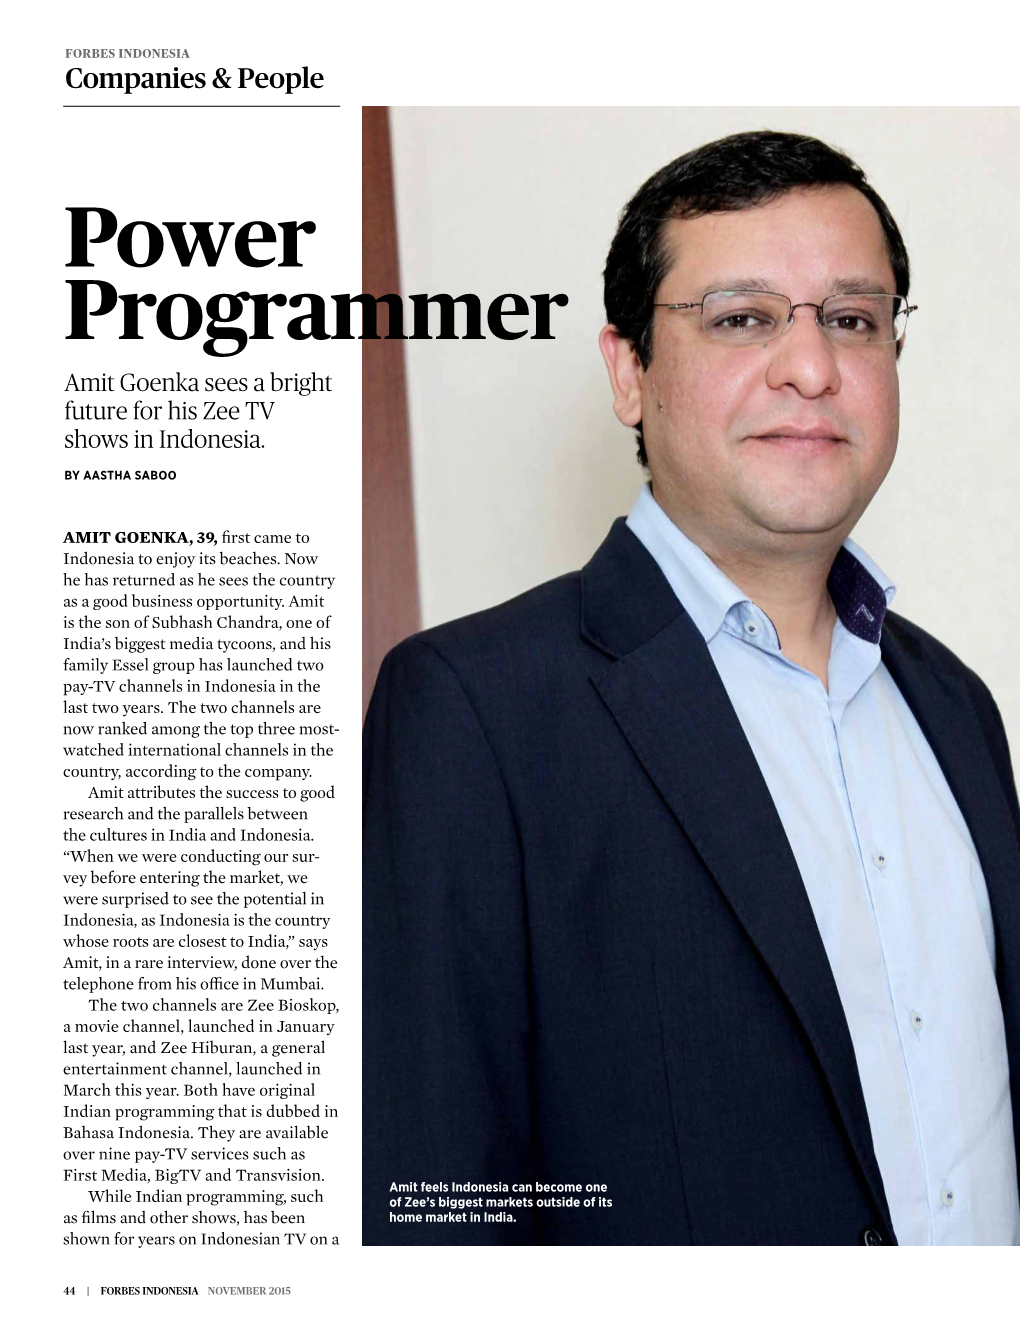 Power Programmer Amit Goenka Sees a Bright Future for His Zee TV Shows in Indonesia